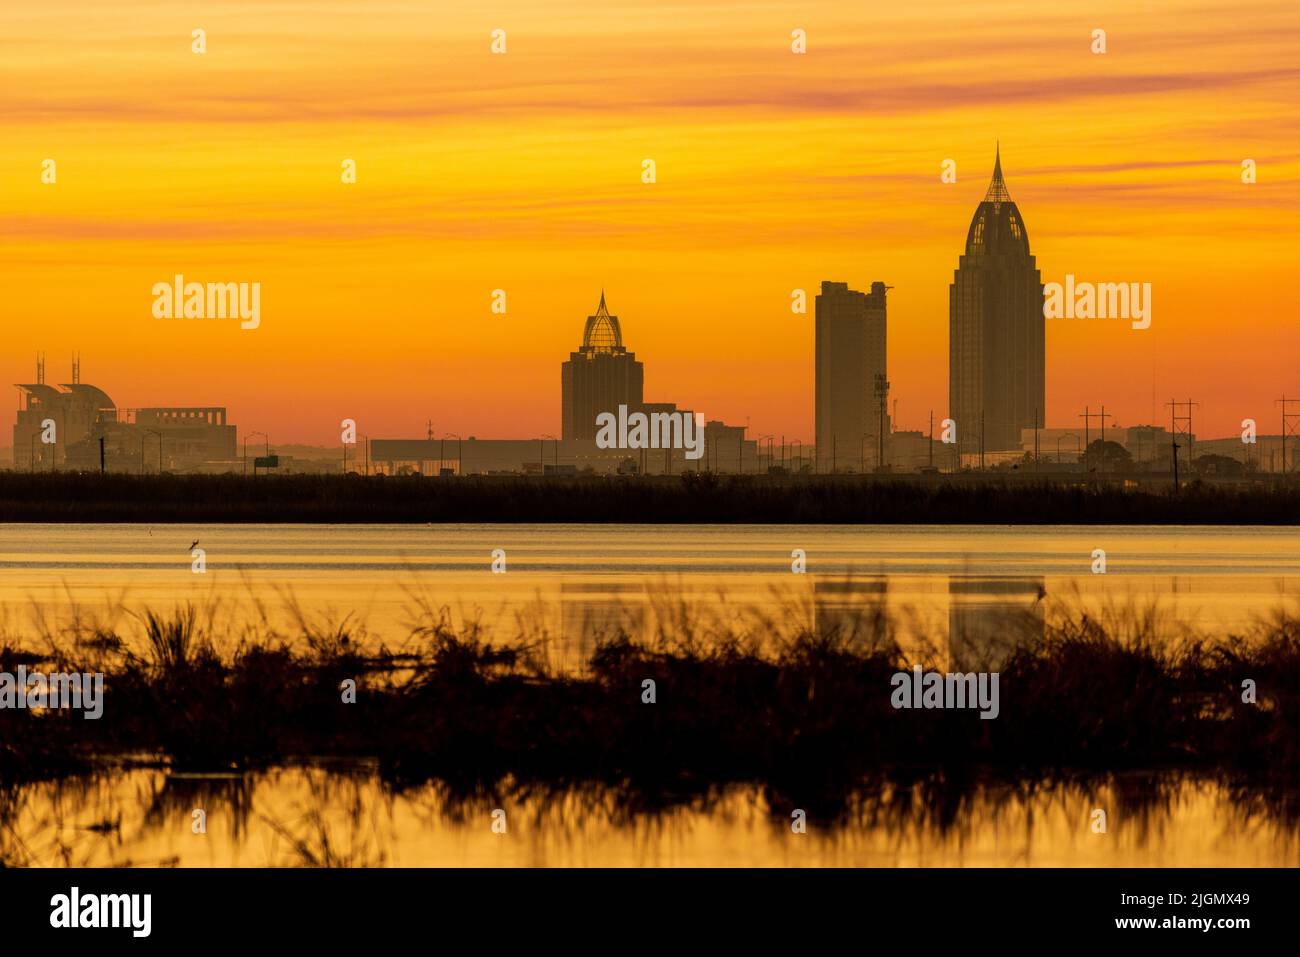 The setting sun paints the sky beyond the skyline of Mobile, Alabama, as seen from across Mobile Bay in a composite image. Stock Photo